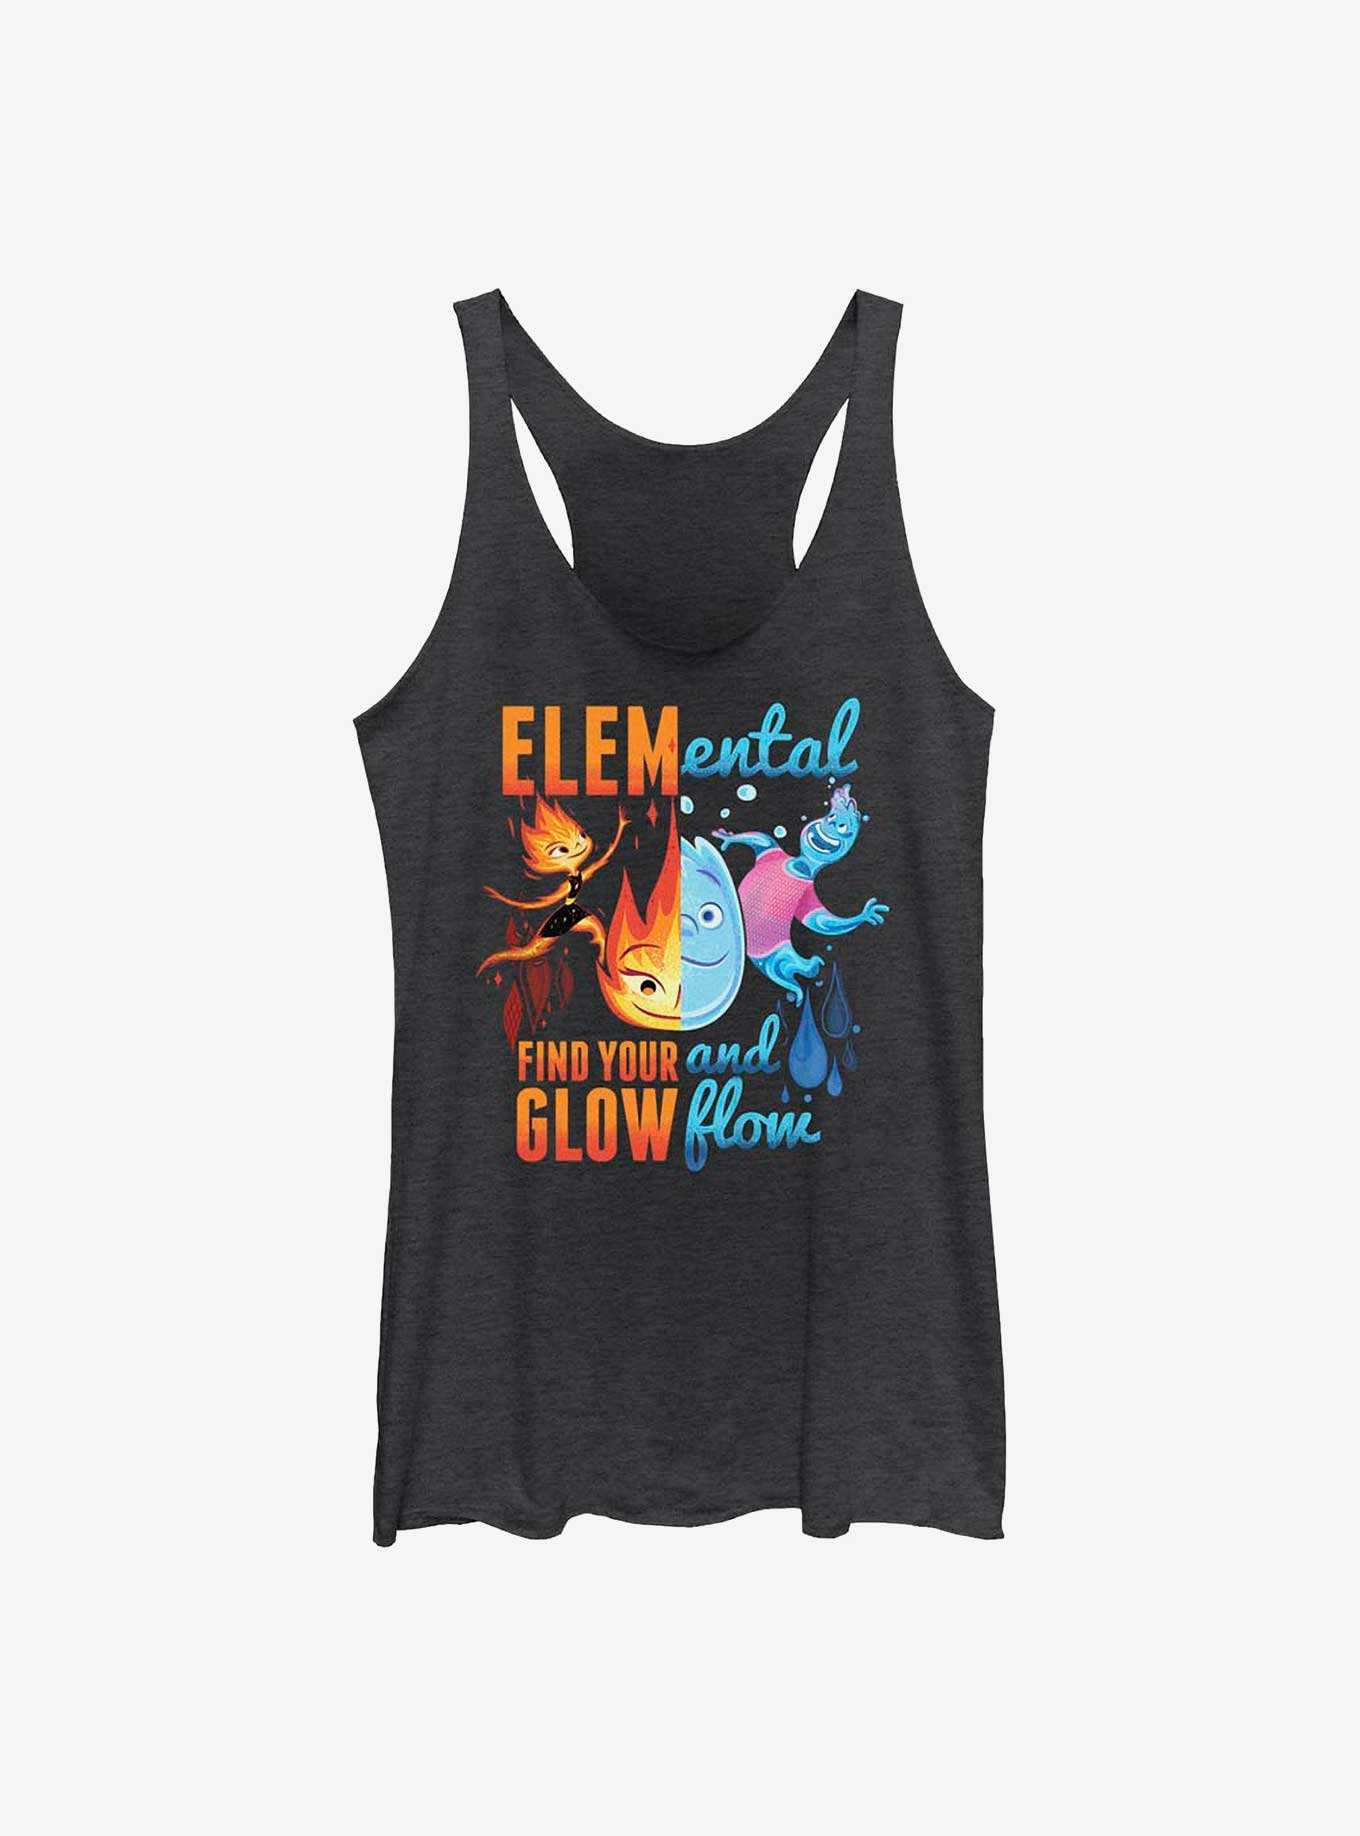 Disney Pixar Elemental Ember and Wade Find Your Glow and Flow Womens Tank Top, , hi-res